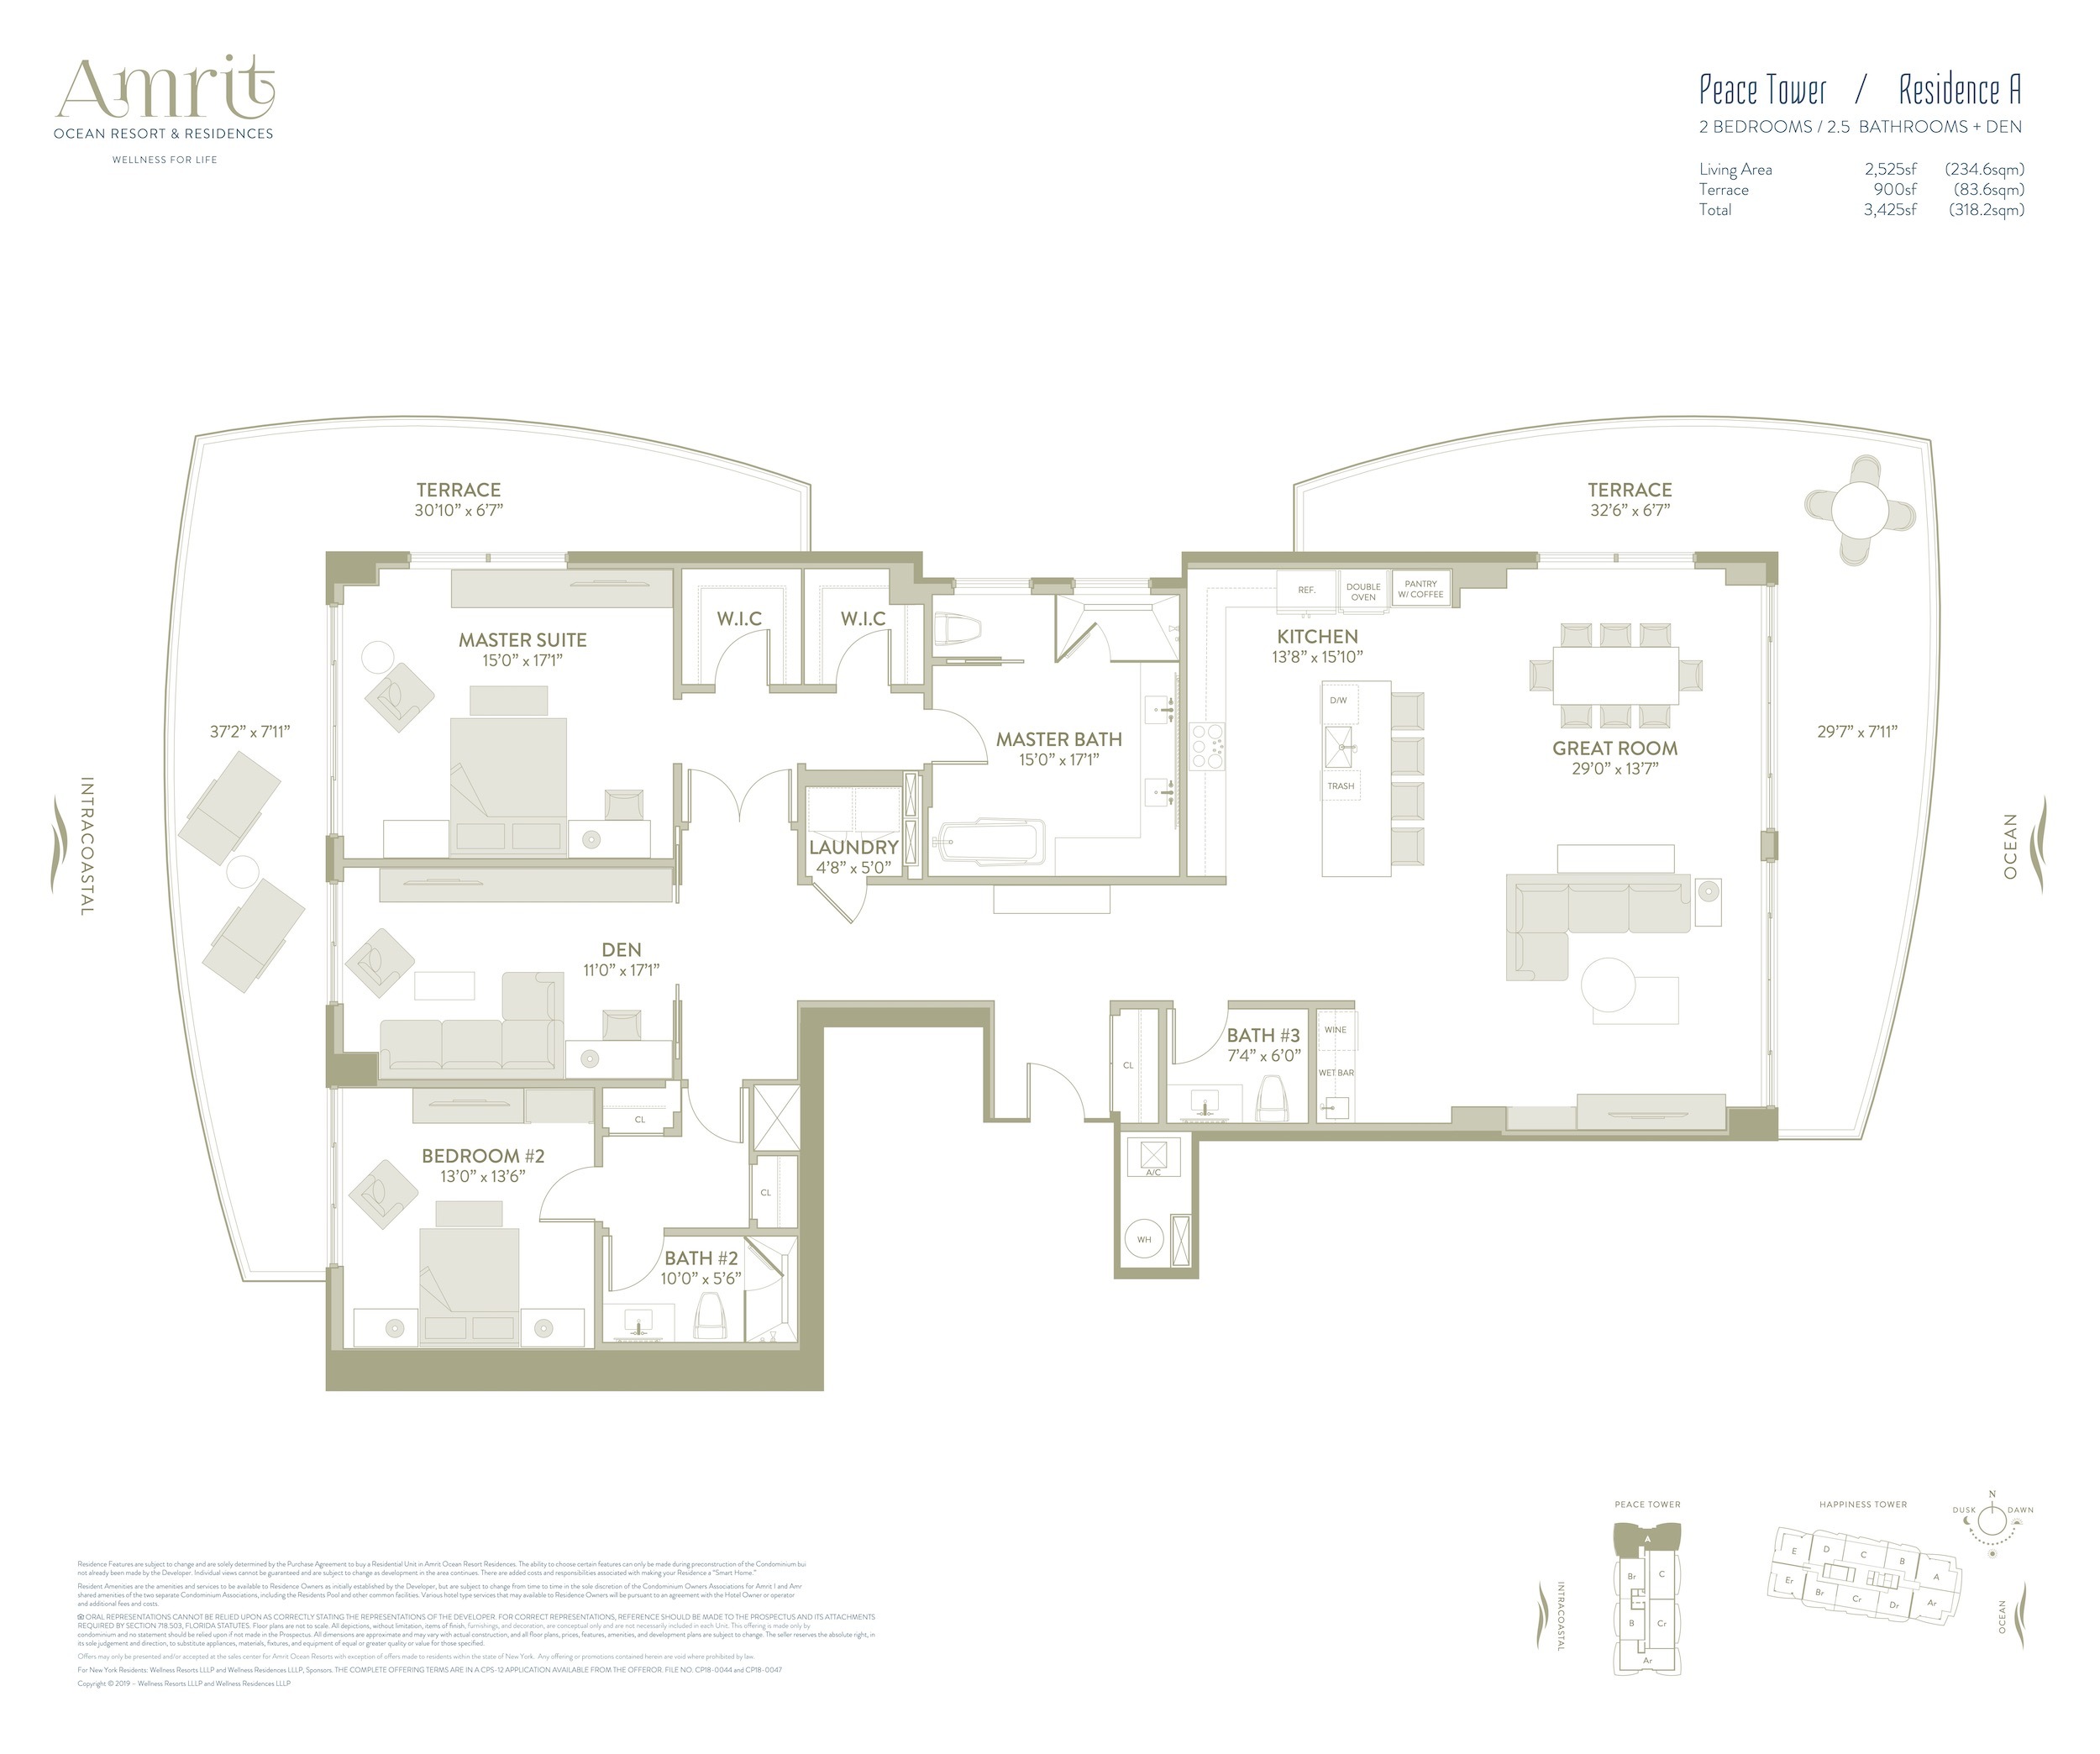 Floor Plan for Amrit Floorplans, Peace Tower Residence A